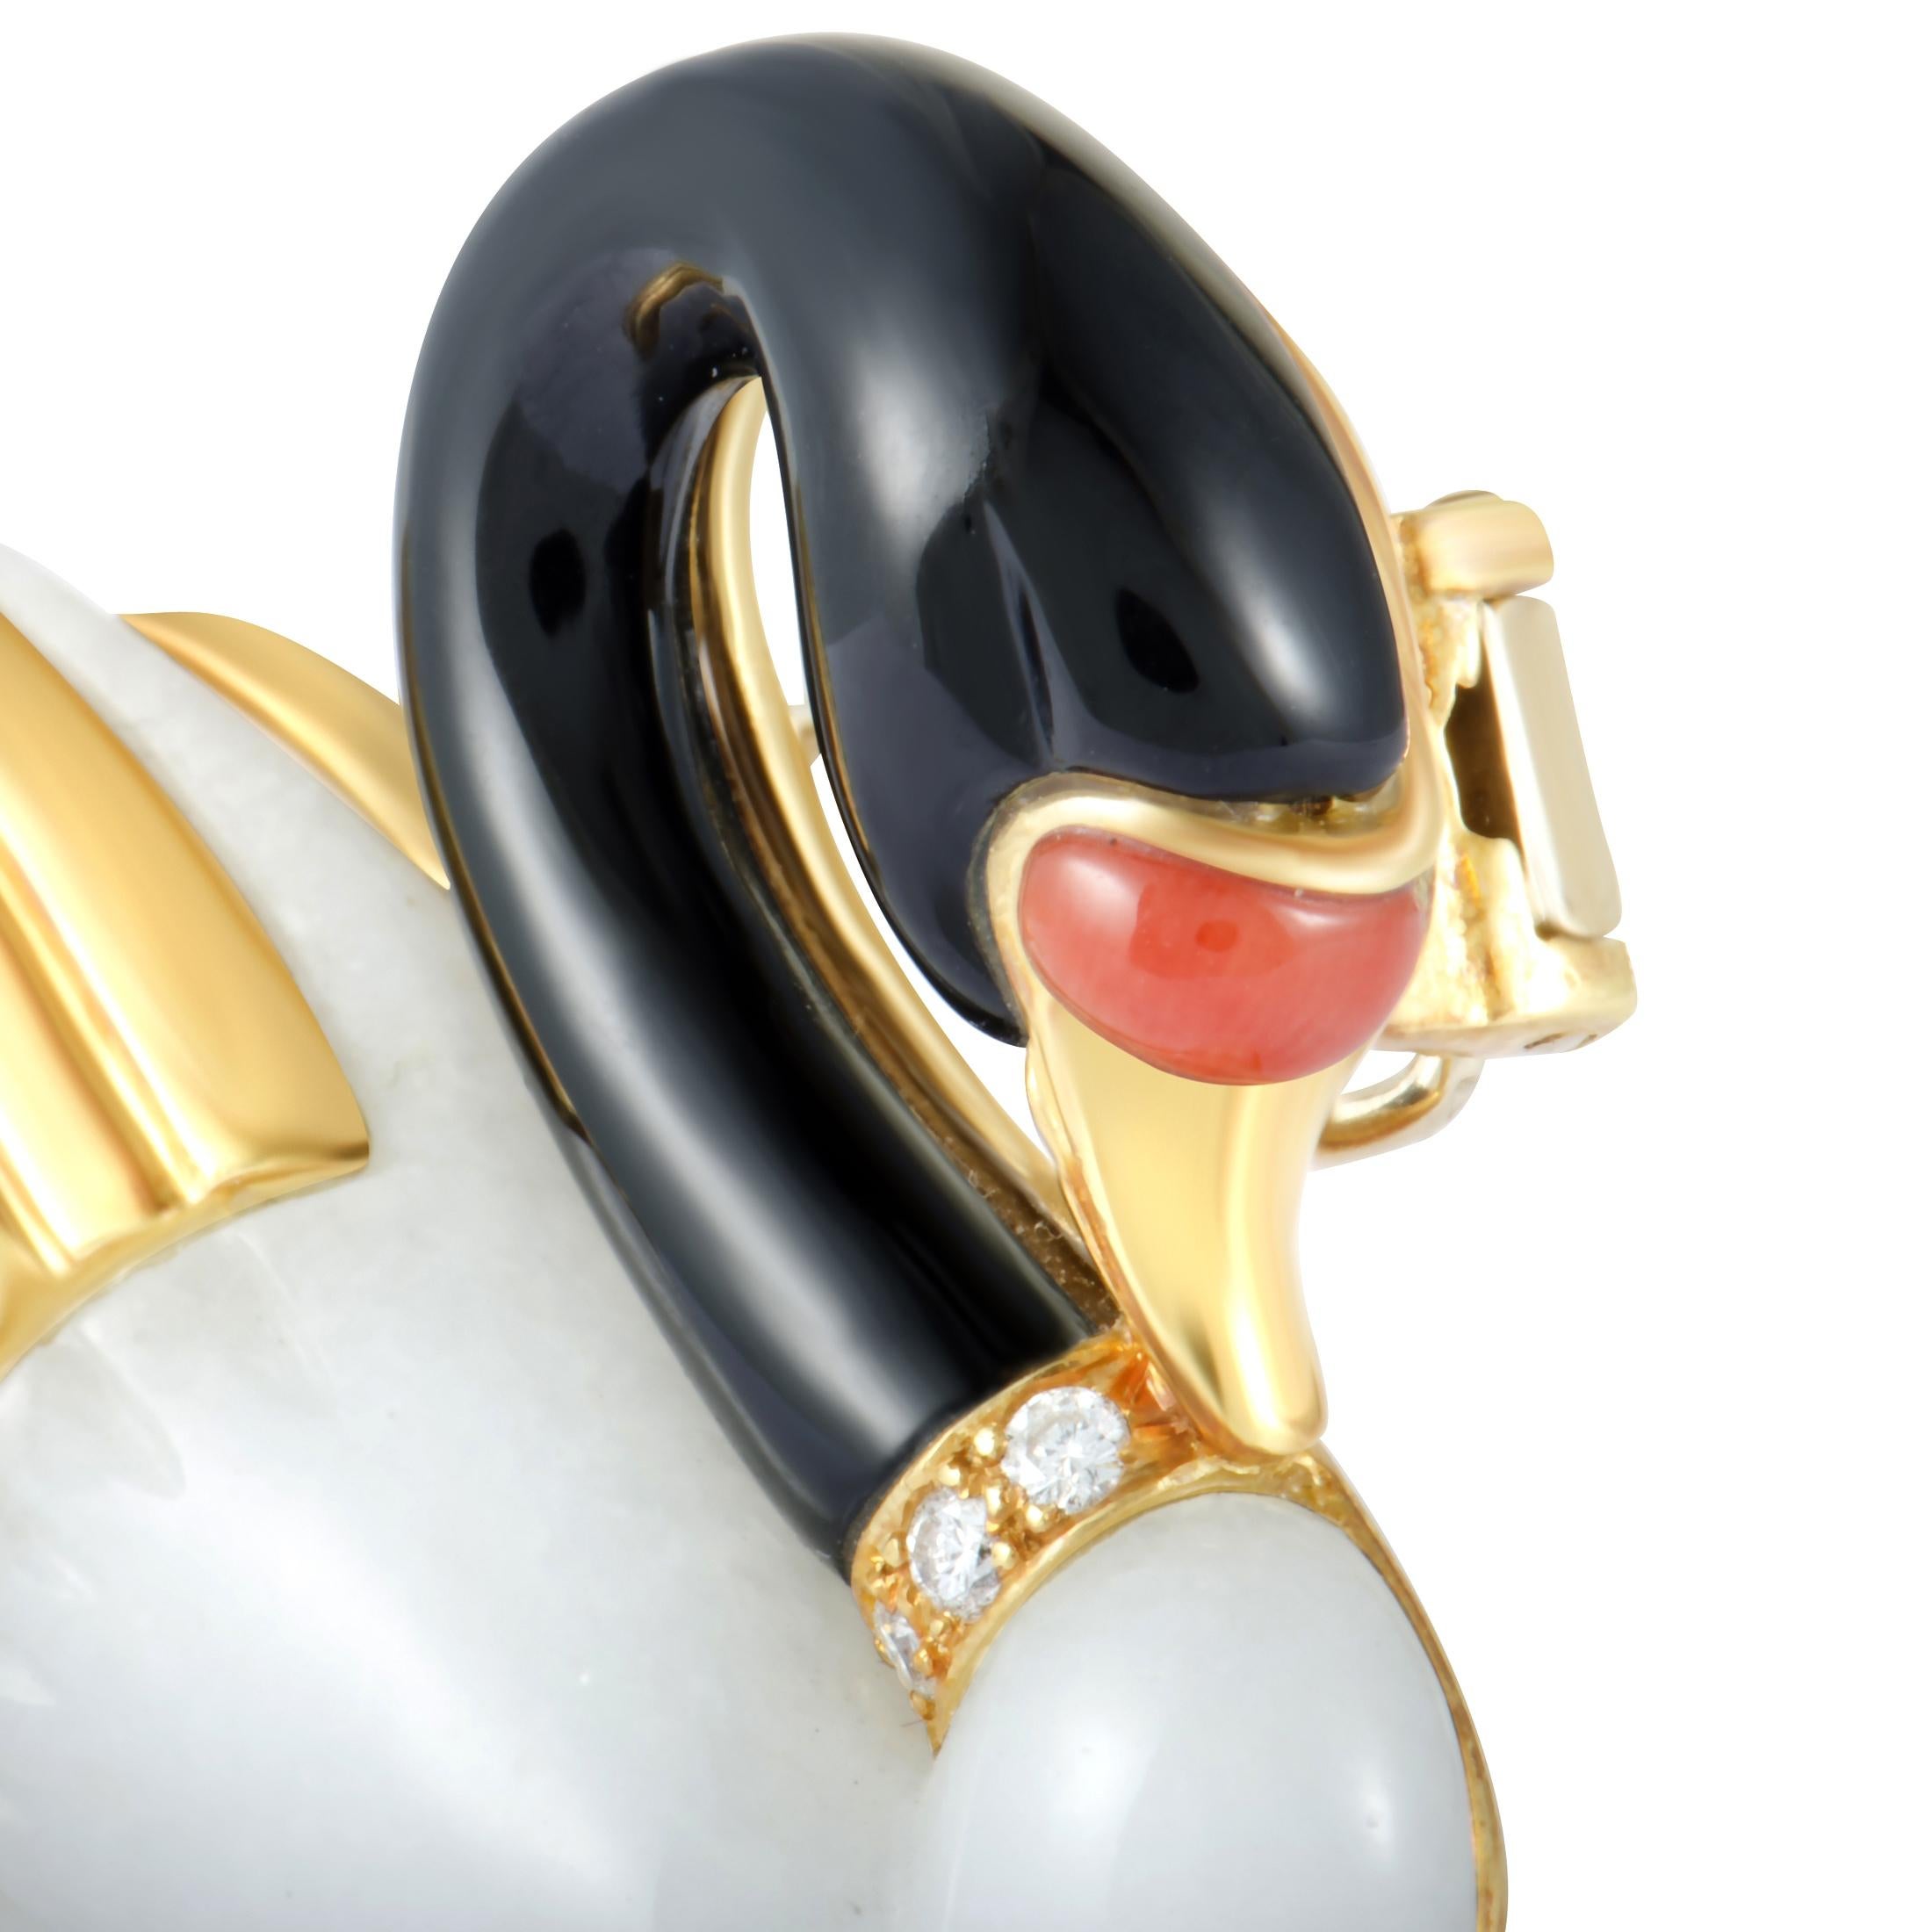 With its splendidly imaginative design and incredibly attractive décor, this gorgeous swan brooch will add a feminine touch to any ensemble of yours. The brooch is made of radiant 18K yellow gold and expertly set with coral, onyx and white jade